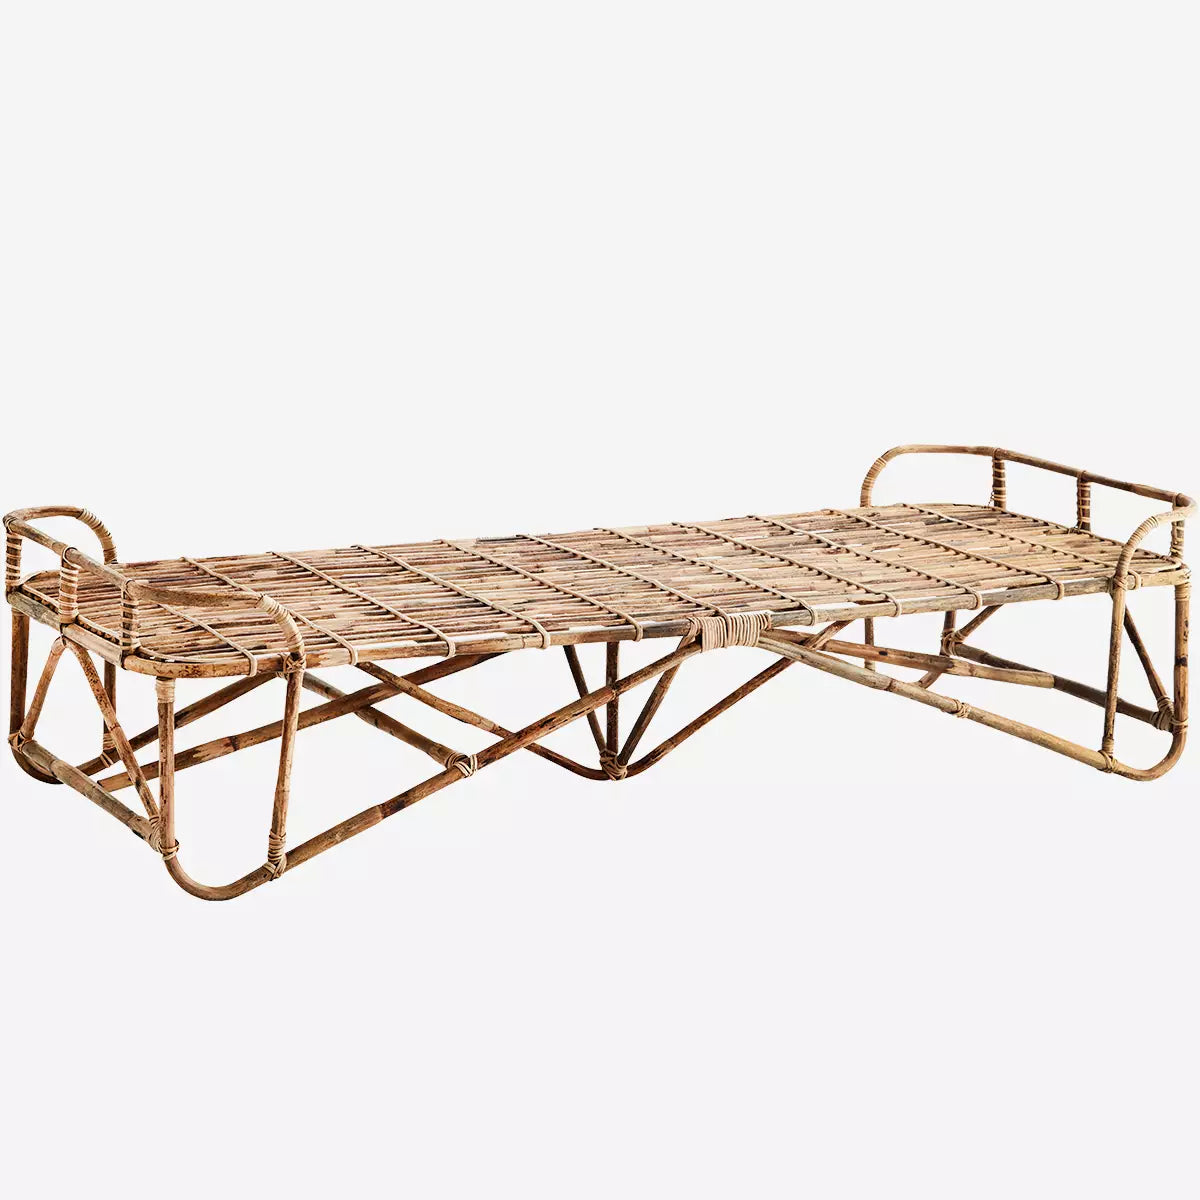 Luxurious Bamboo Daybed & Sofabed – Perfect for Lounge or Garden Retreat!